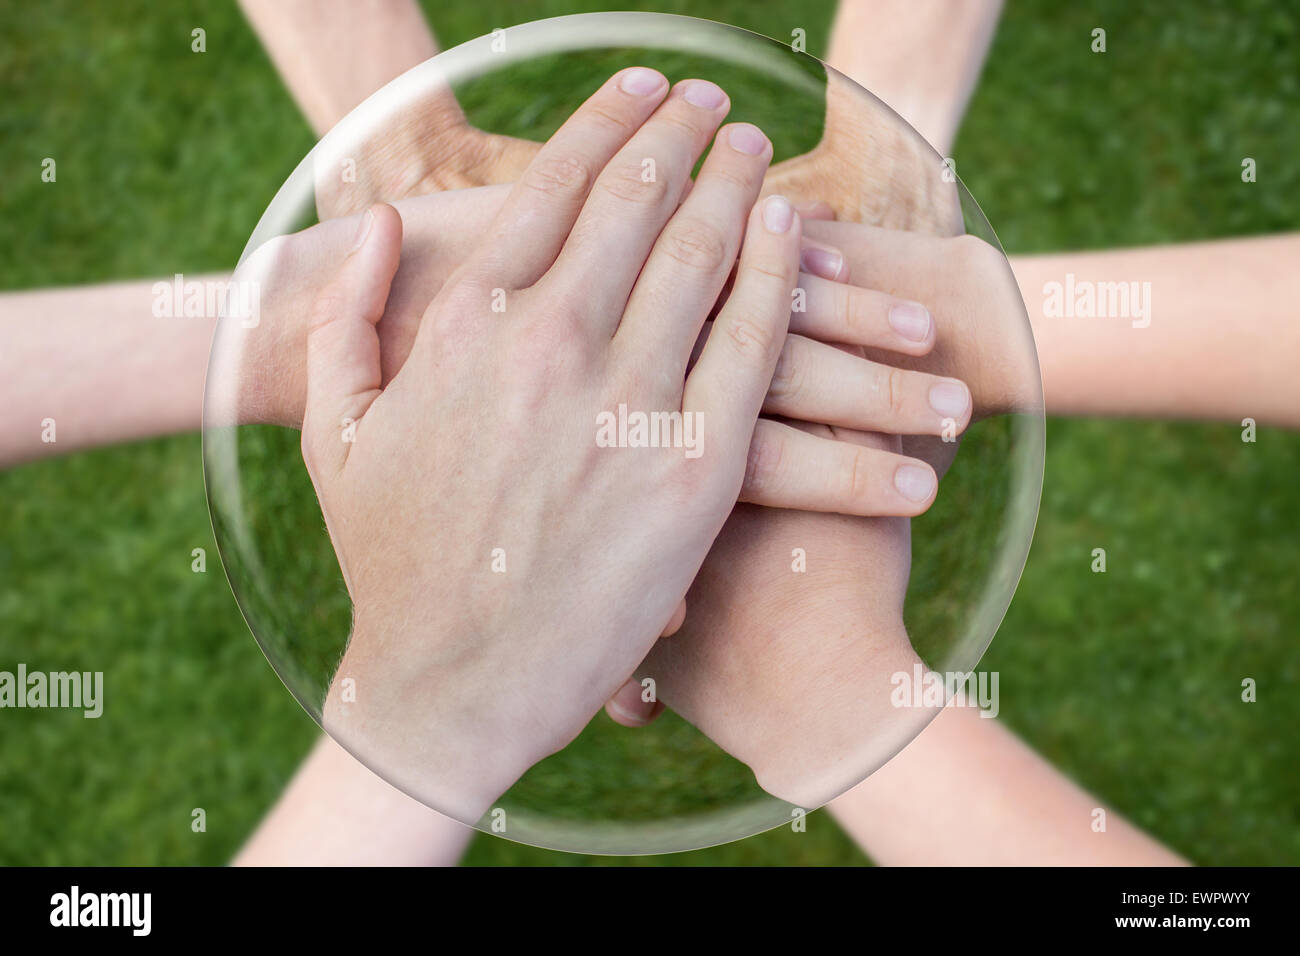 Hands arms above grass uniting joining in glass sphere Stock Photo